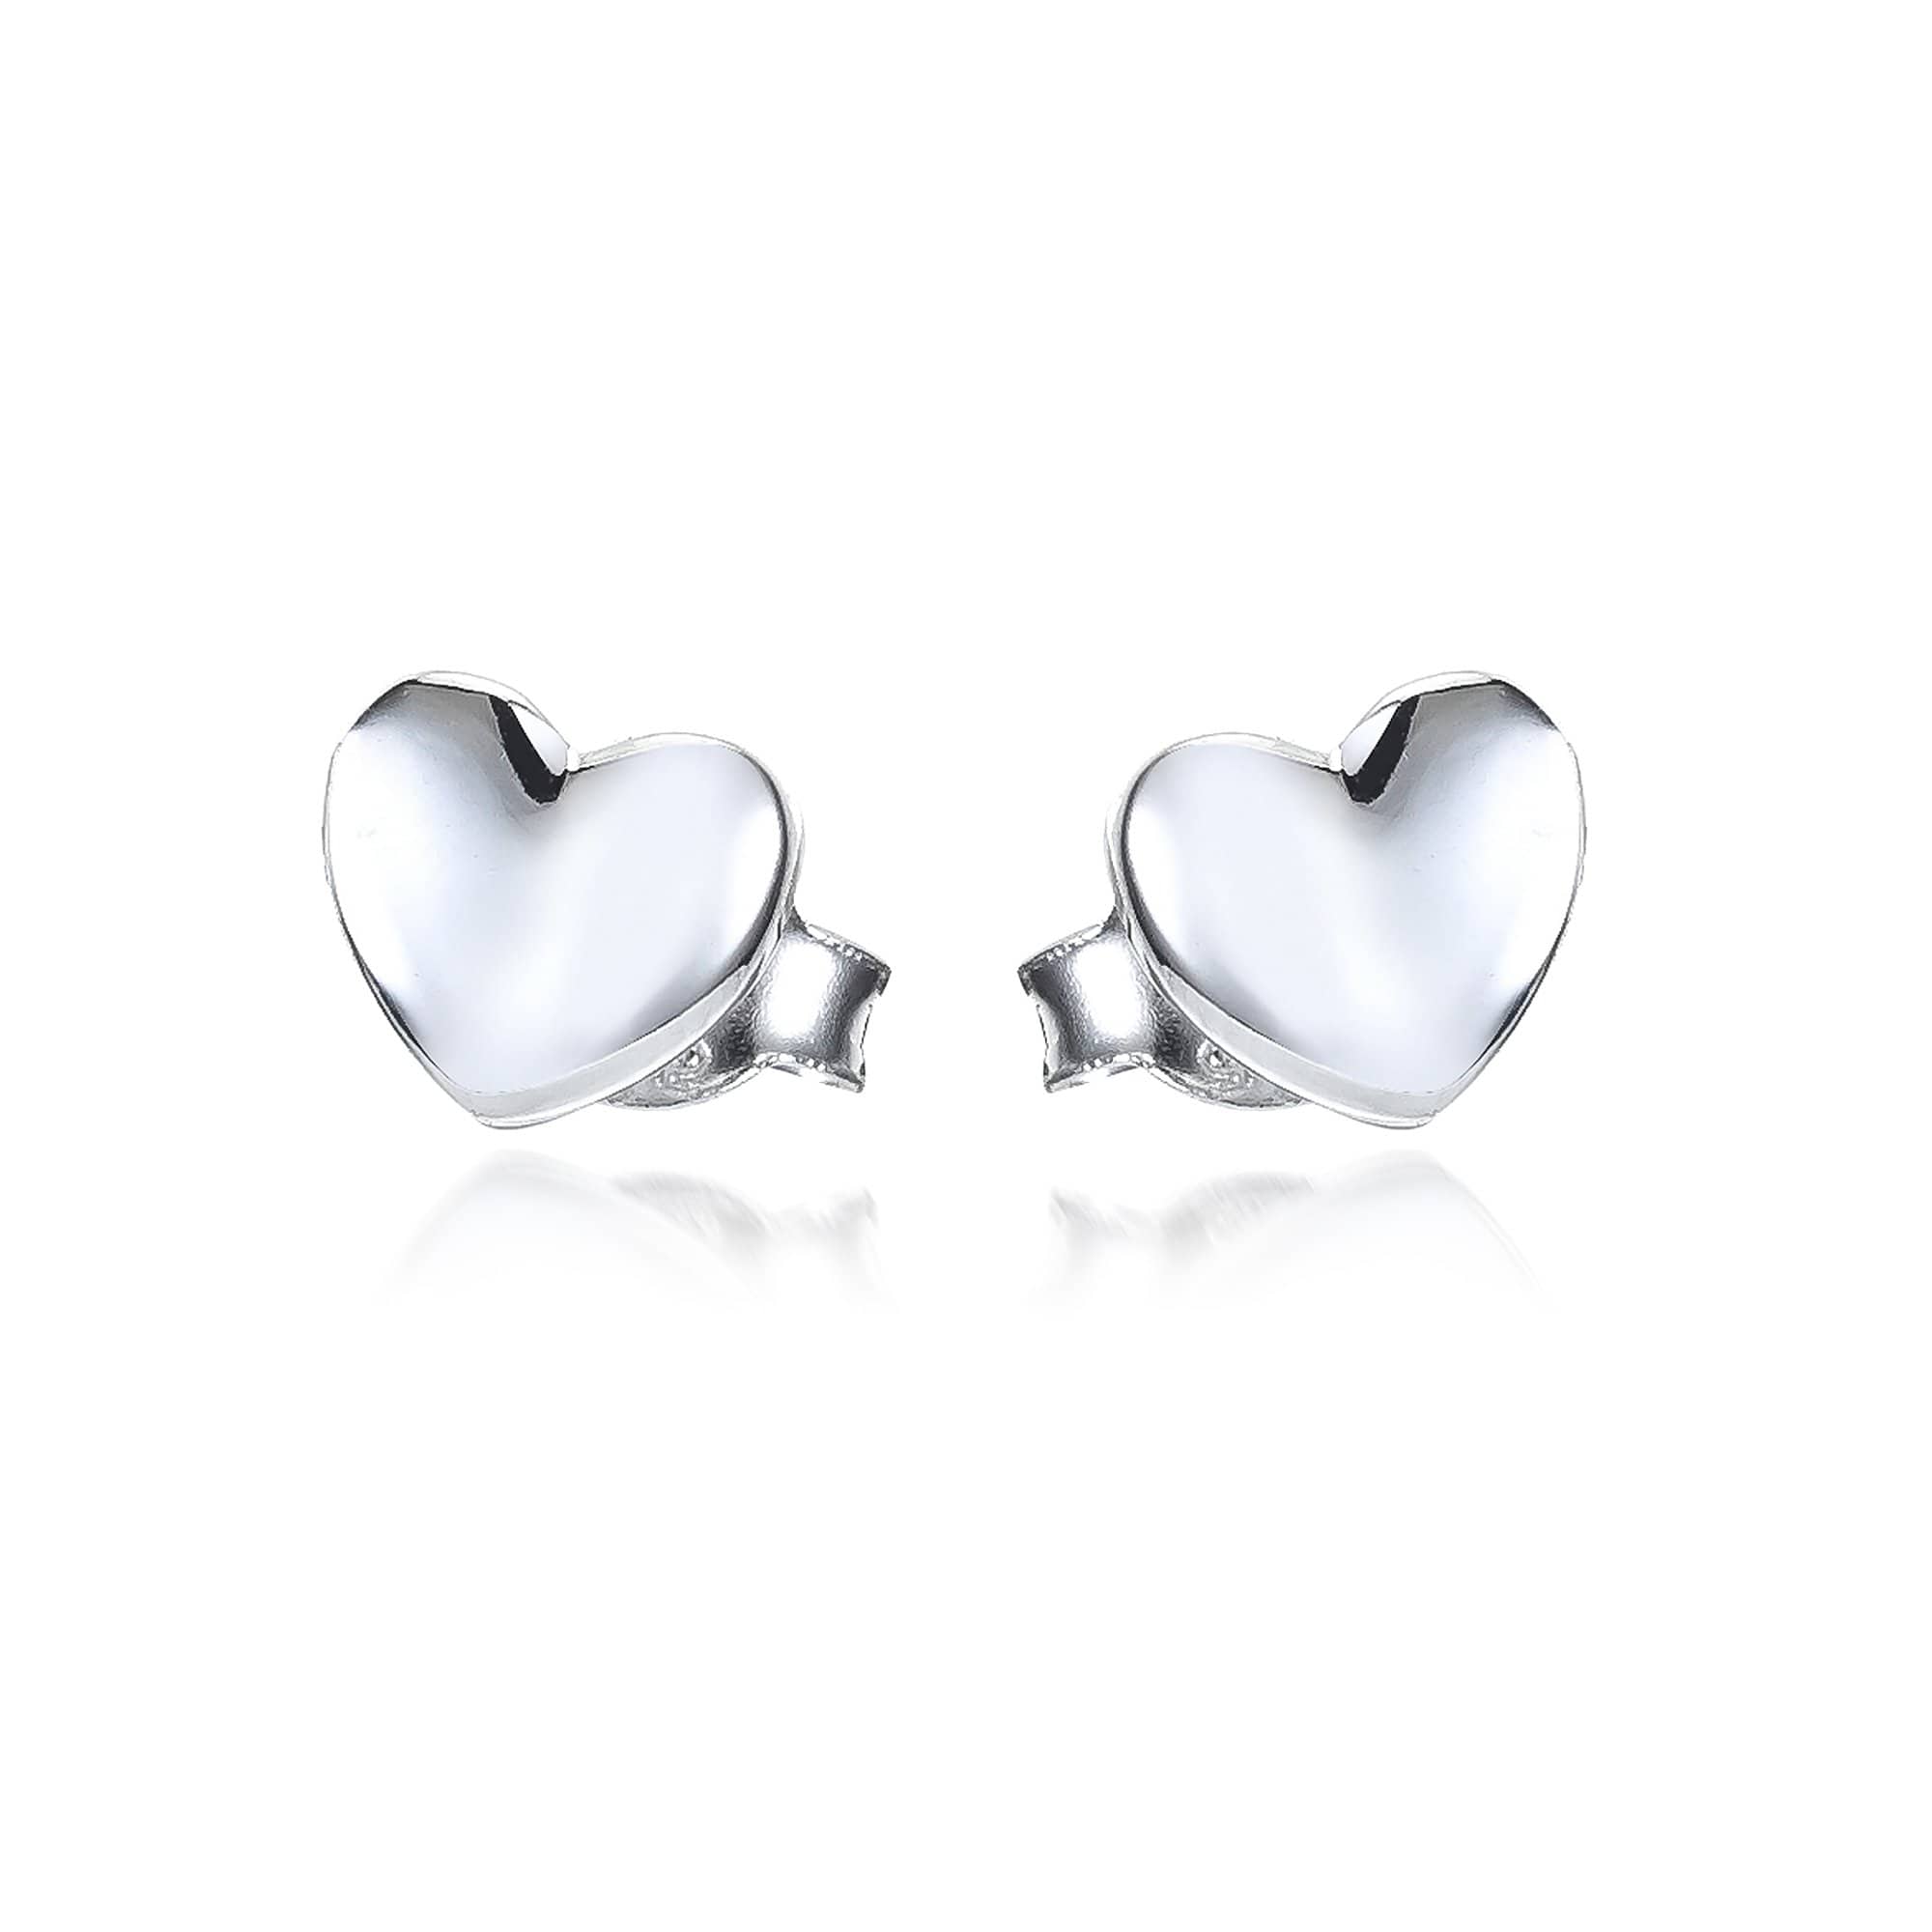 Lynora Jewellery Earring Sterling Silver Small Silver Heart Stud Sterling Silver